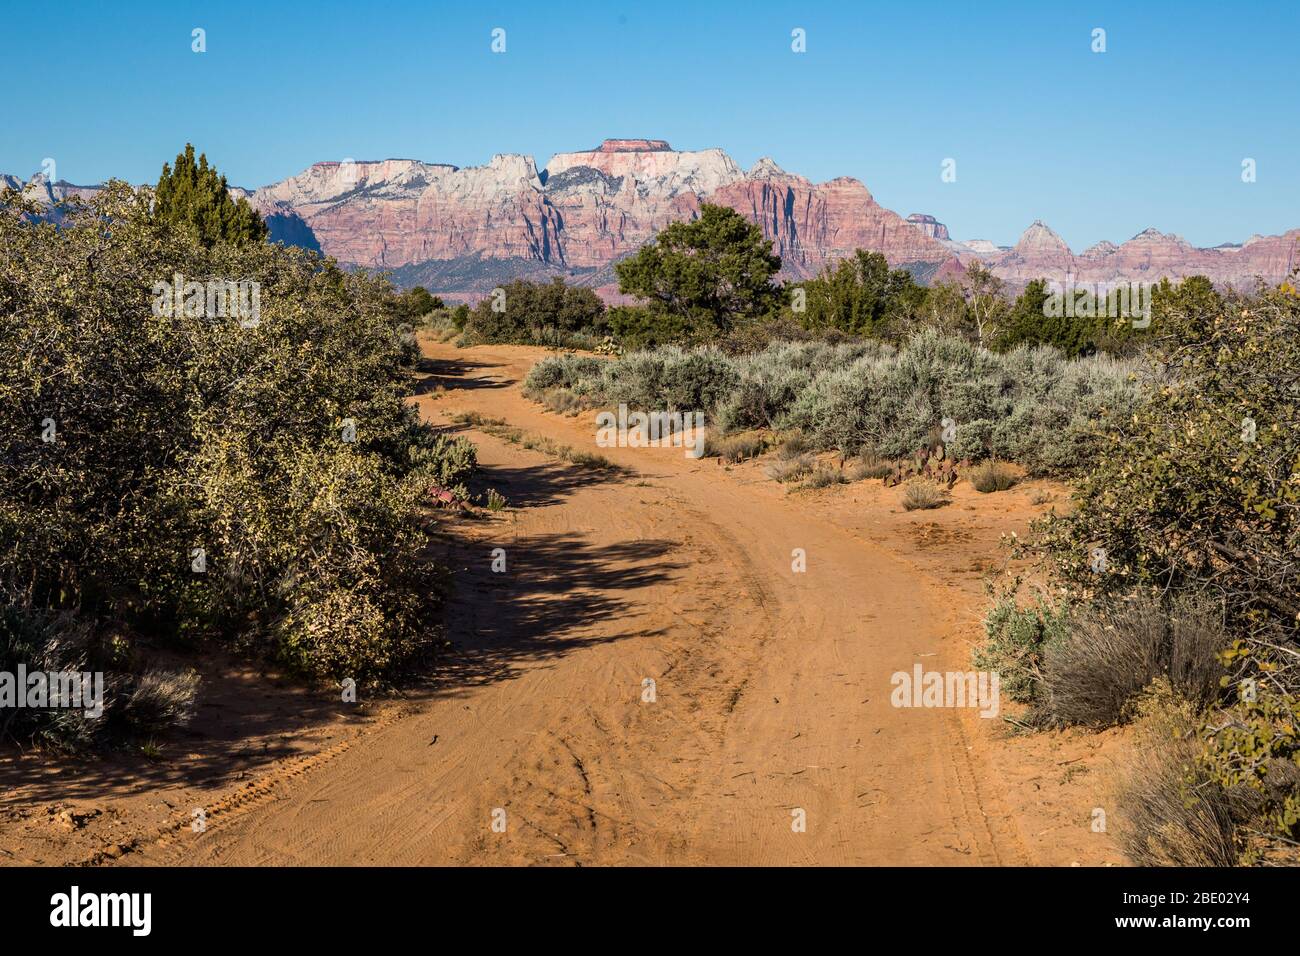 A narrow dirt road leads through sagebrush and pinyon pines toward tall sandstone cliffs of pink and red rock. Stock Photo